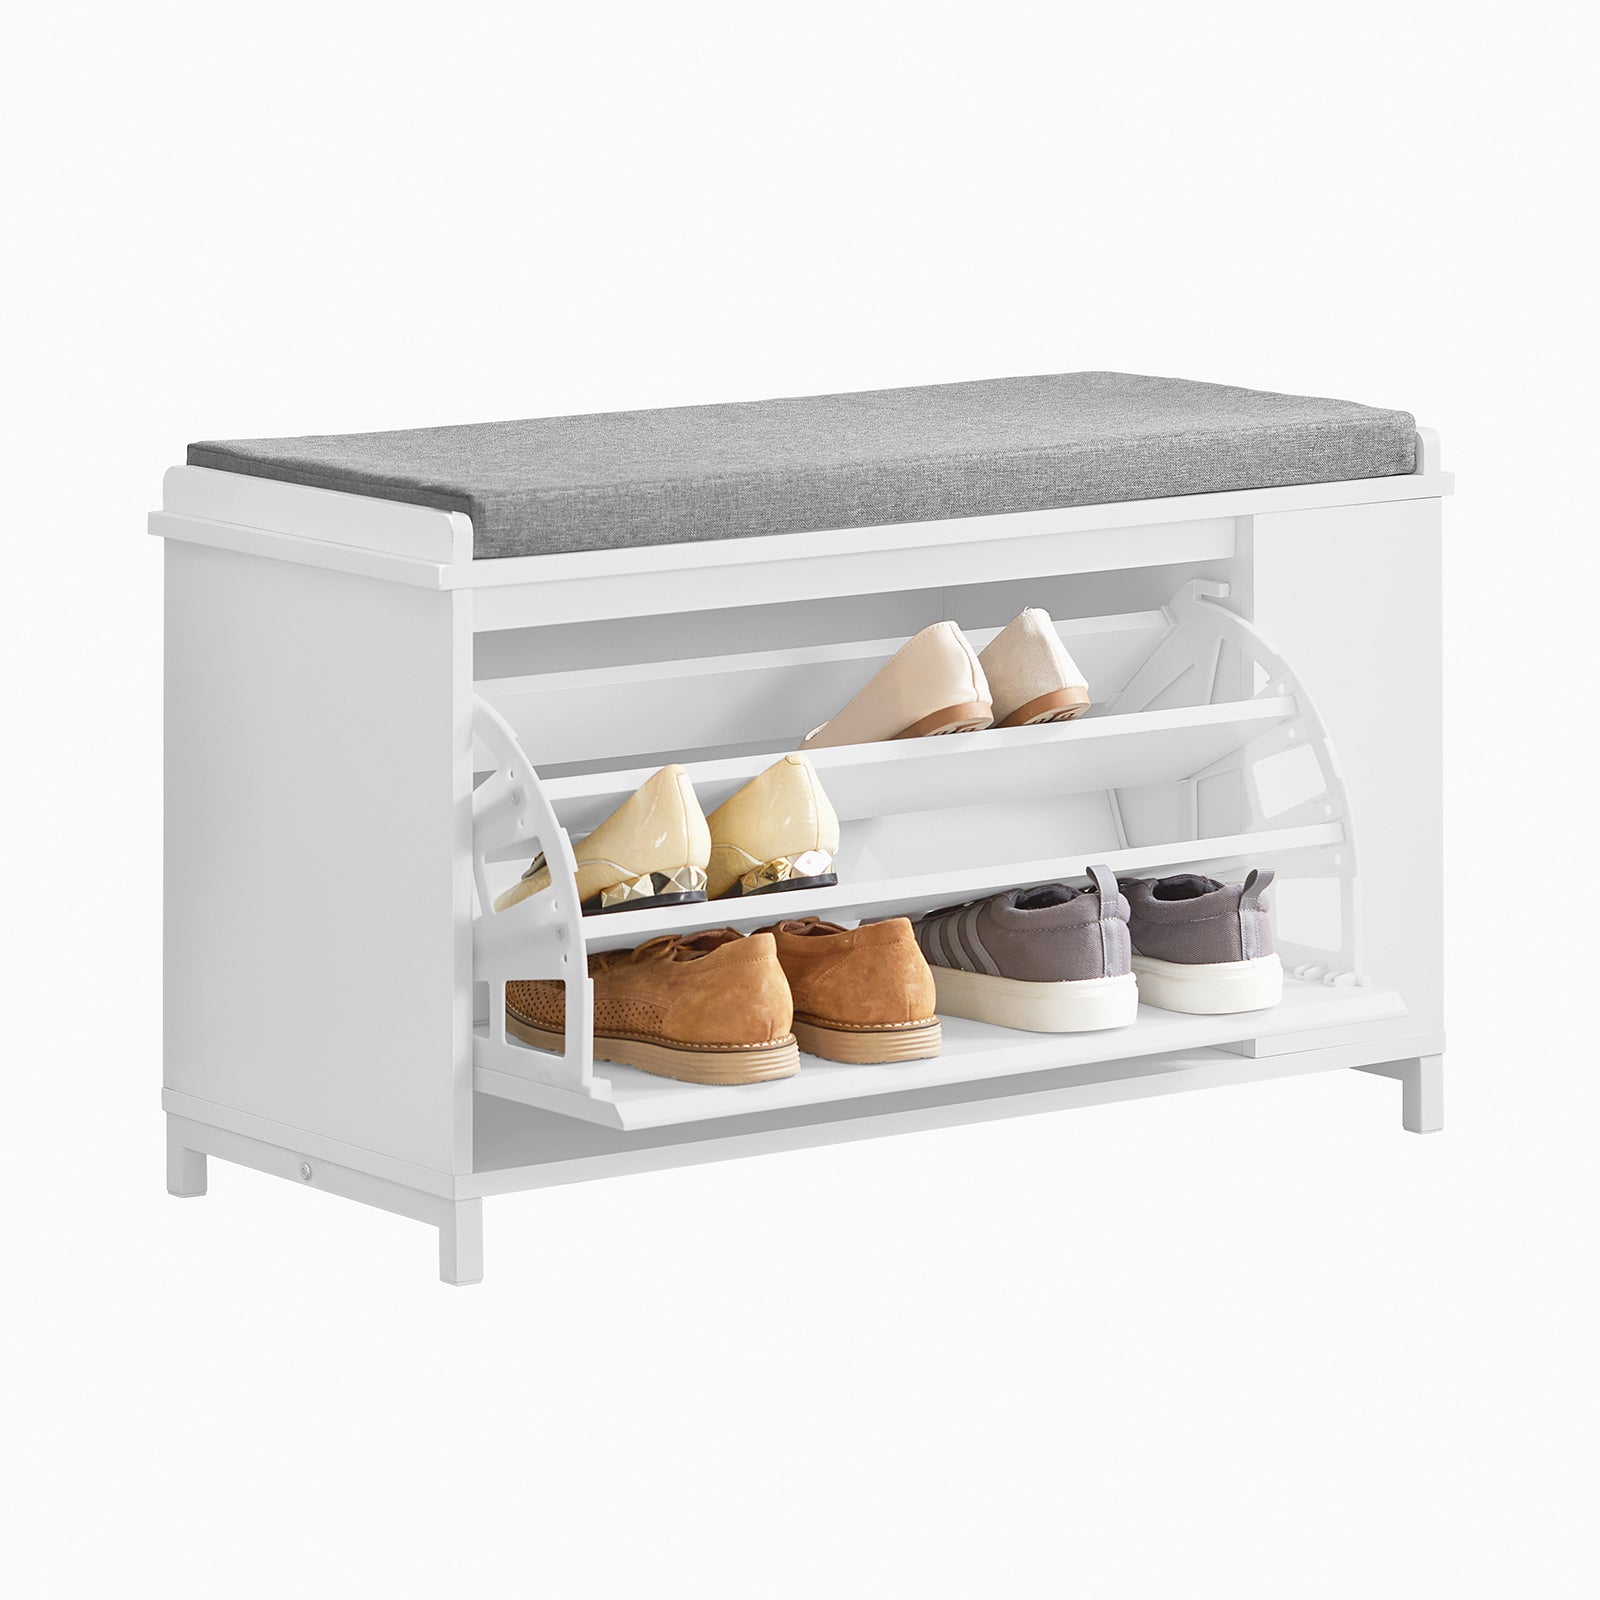 SoBuy FSR105-W, White Flip-Drawer Shoe Bench, Storage Bench with Side Shelf and Removable Seat Cushion